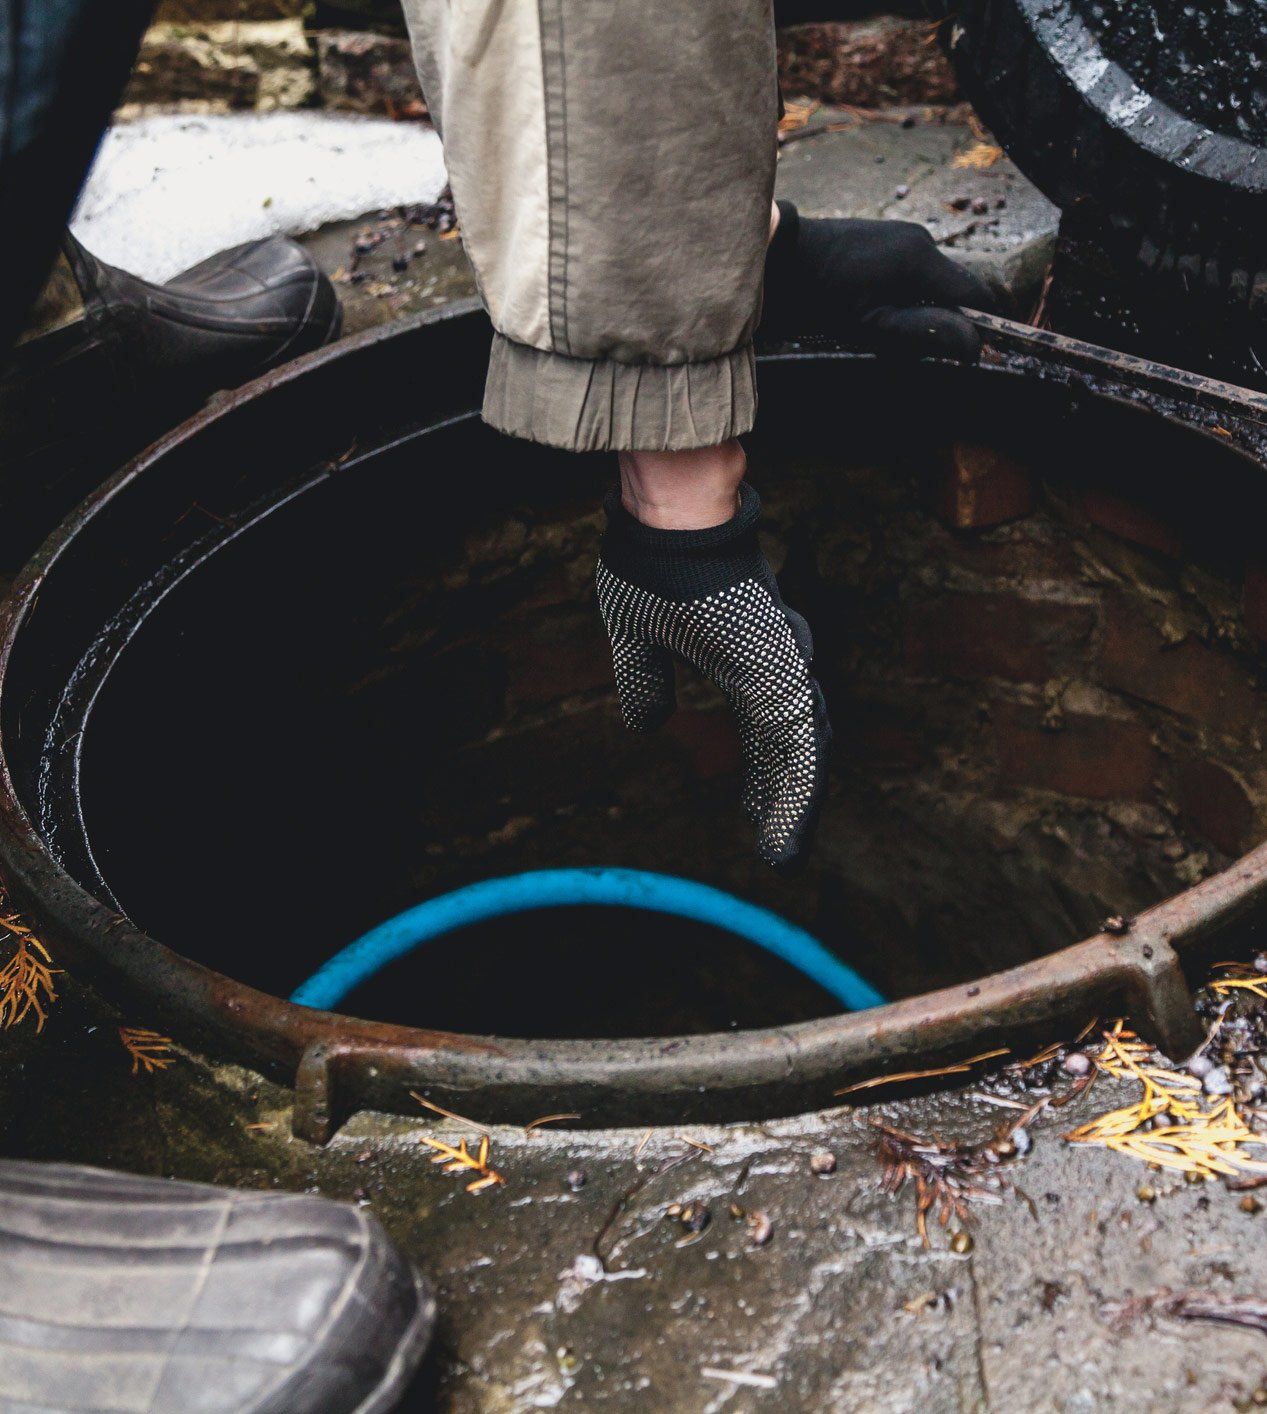 Sewers Inspection — Man Inspecting the Sewer in Fredericksburg, VA